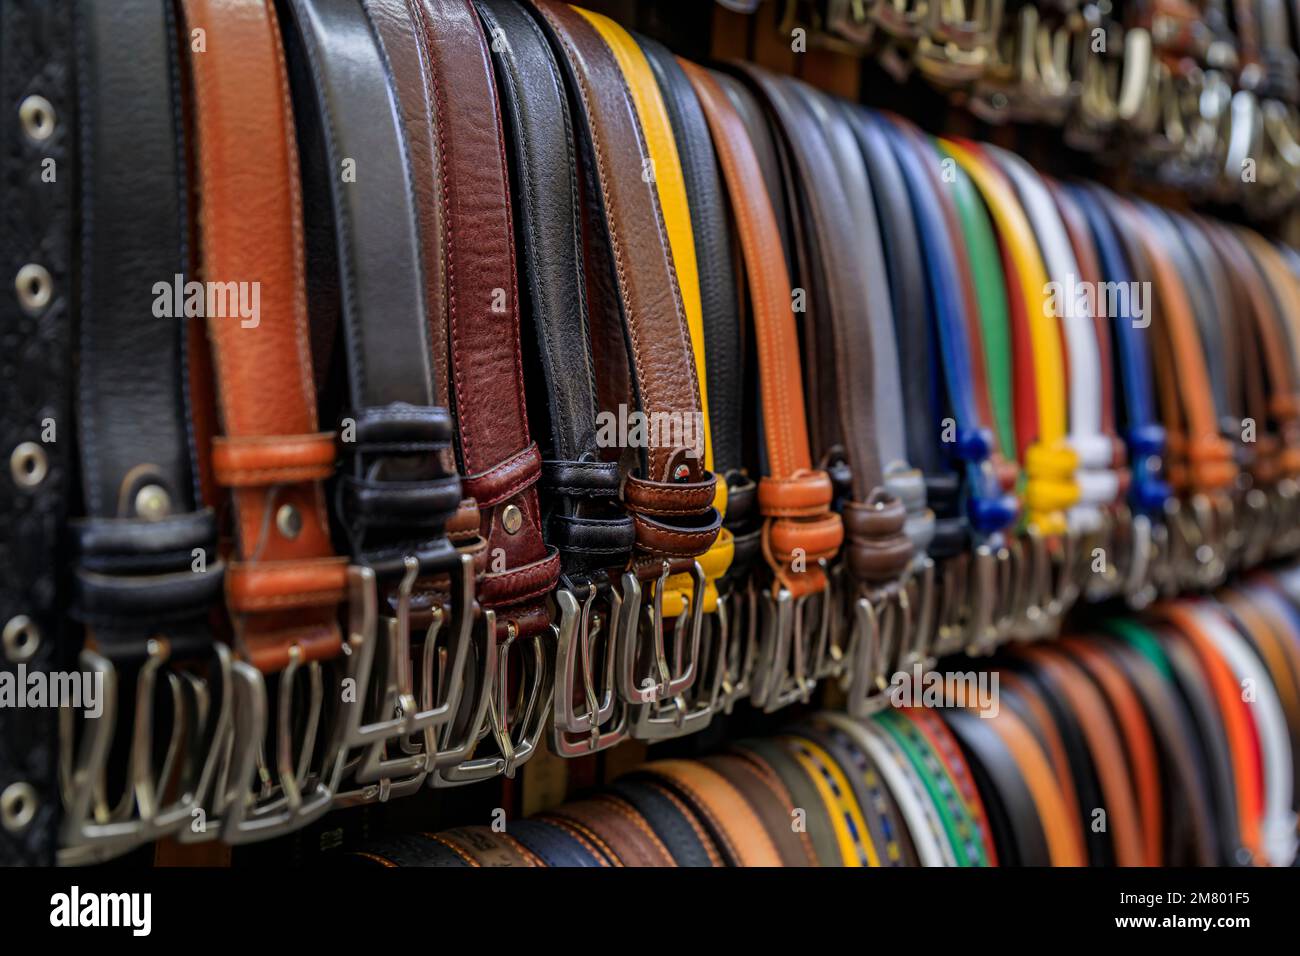 Colorful leather goods, selection of belts on display at a street shop in Central Market Mercato Centrale in Florence, Italy Stock Photo